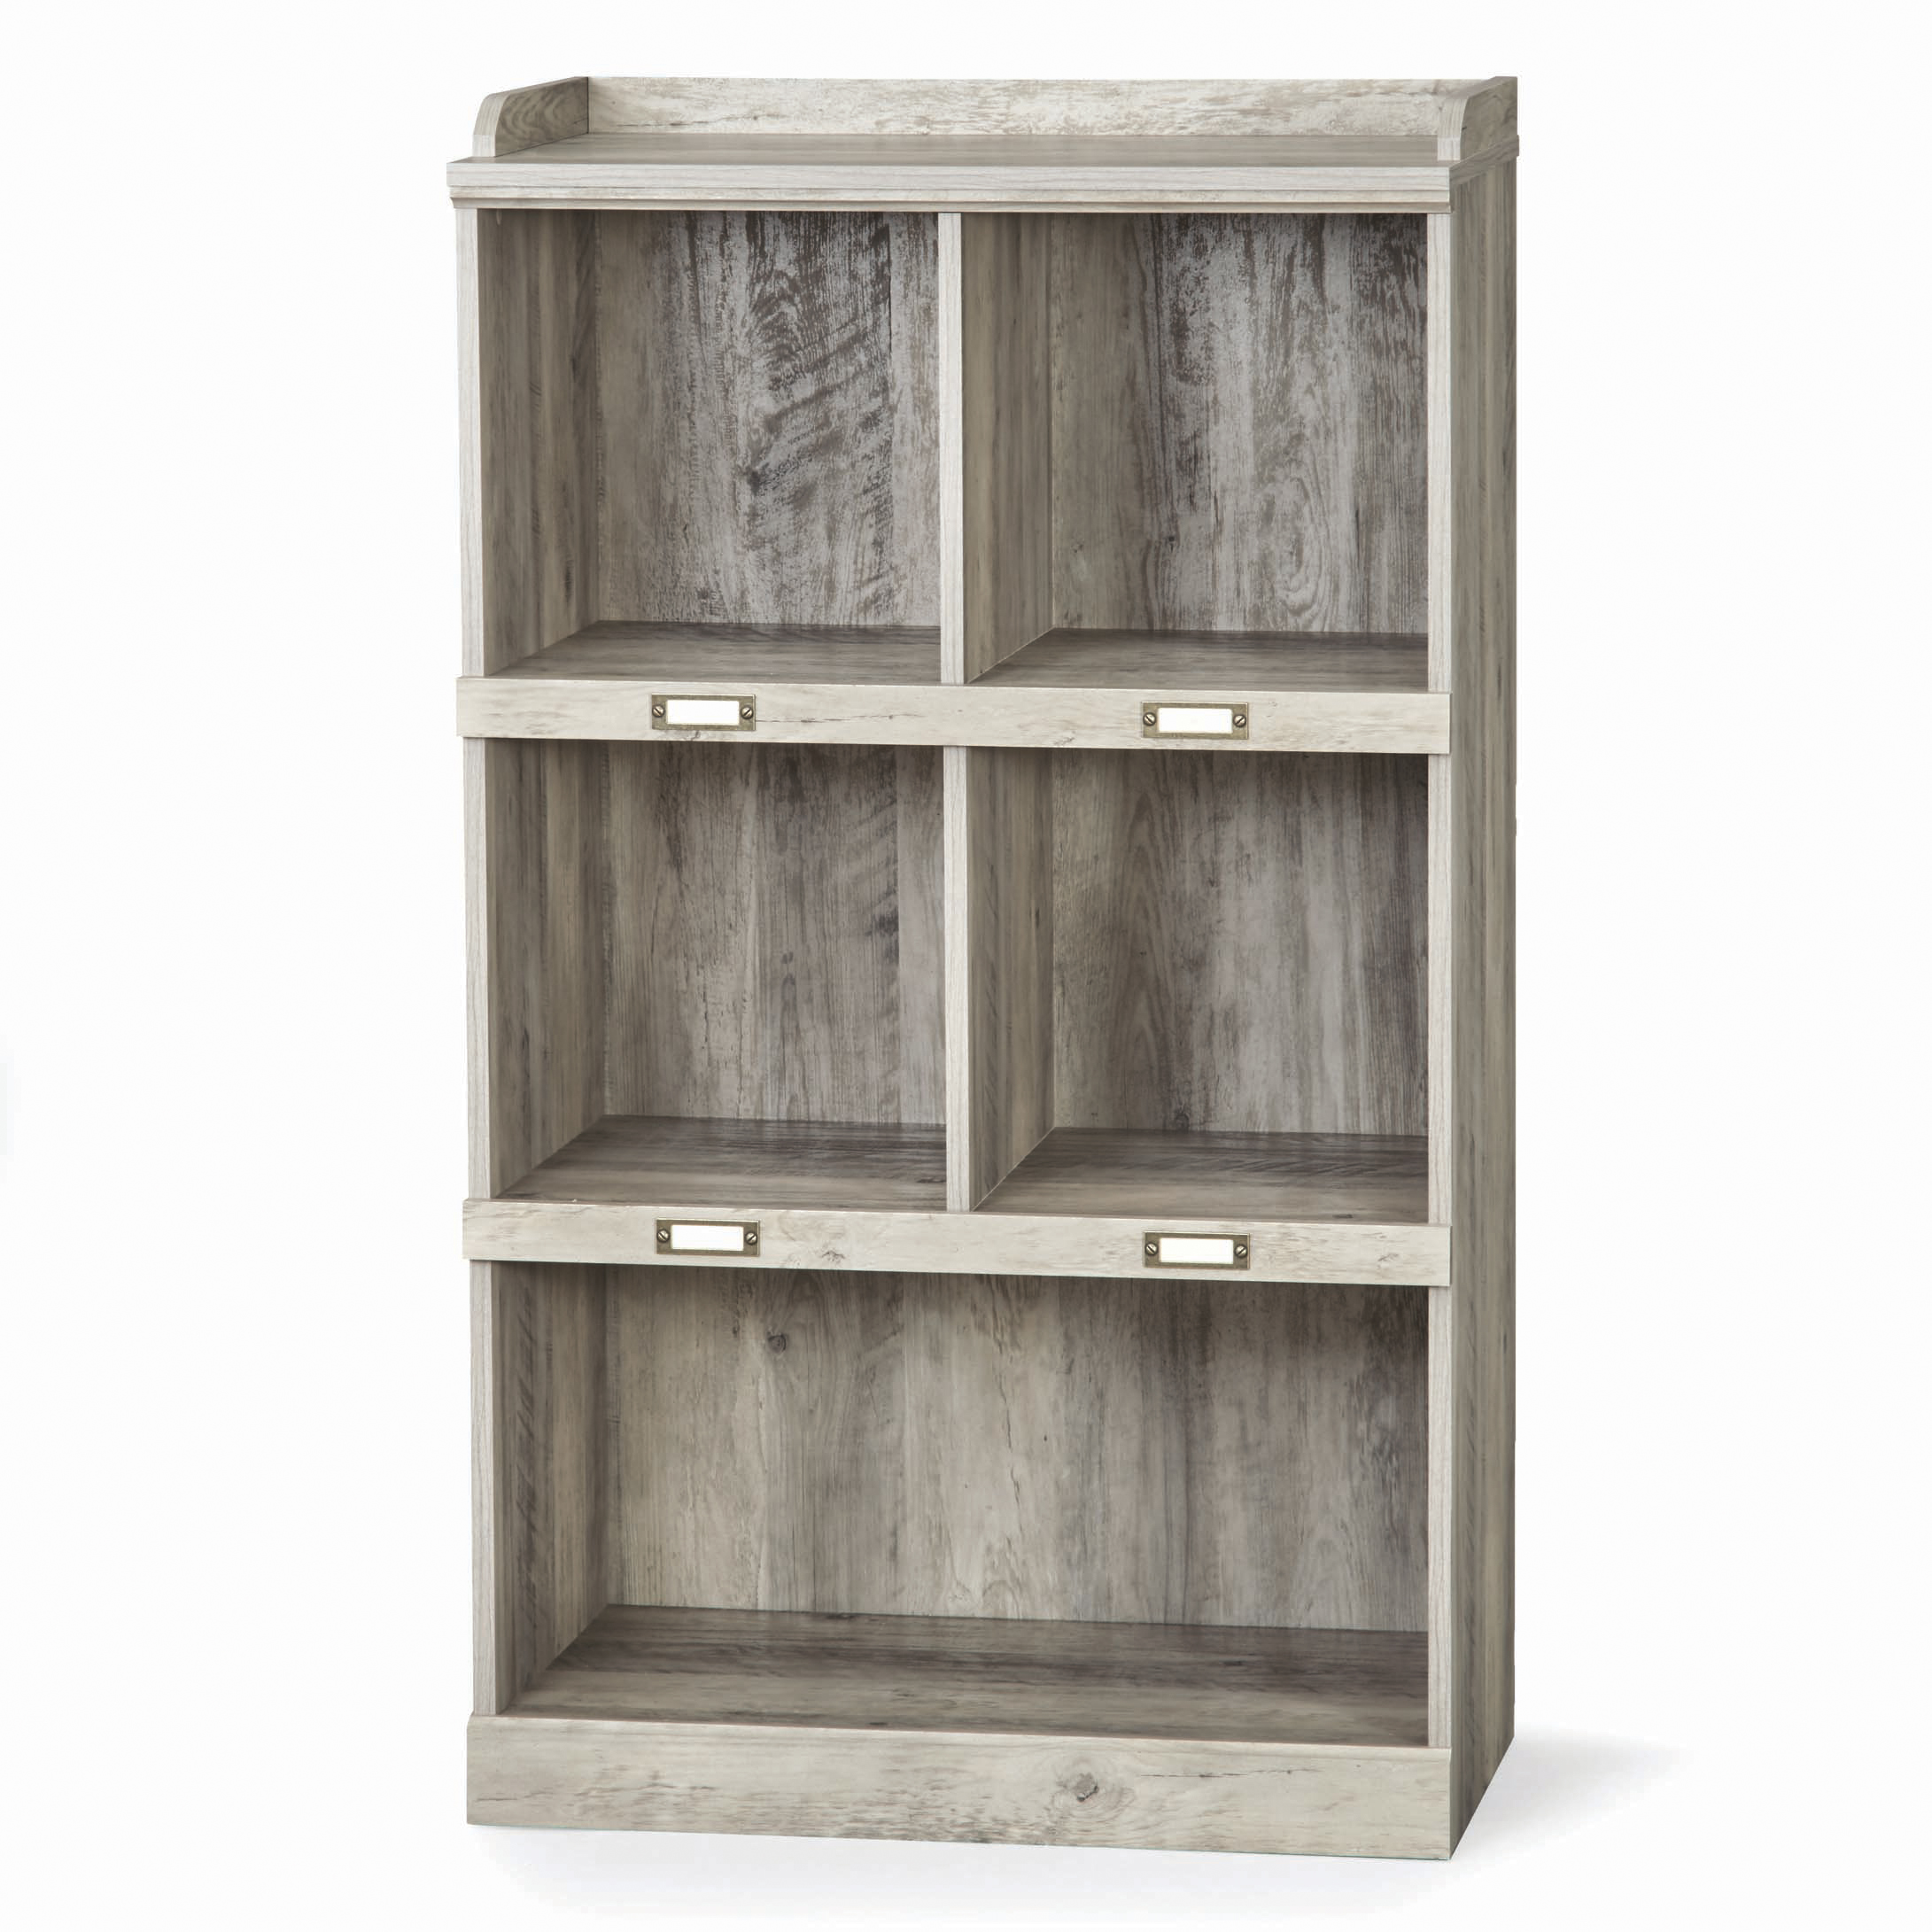 Better Homes & Gardens Modern Farmhouse 5-Cube Organizer Bookcase with Name Plates, Rustic Gray Finish - image 1 of 7